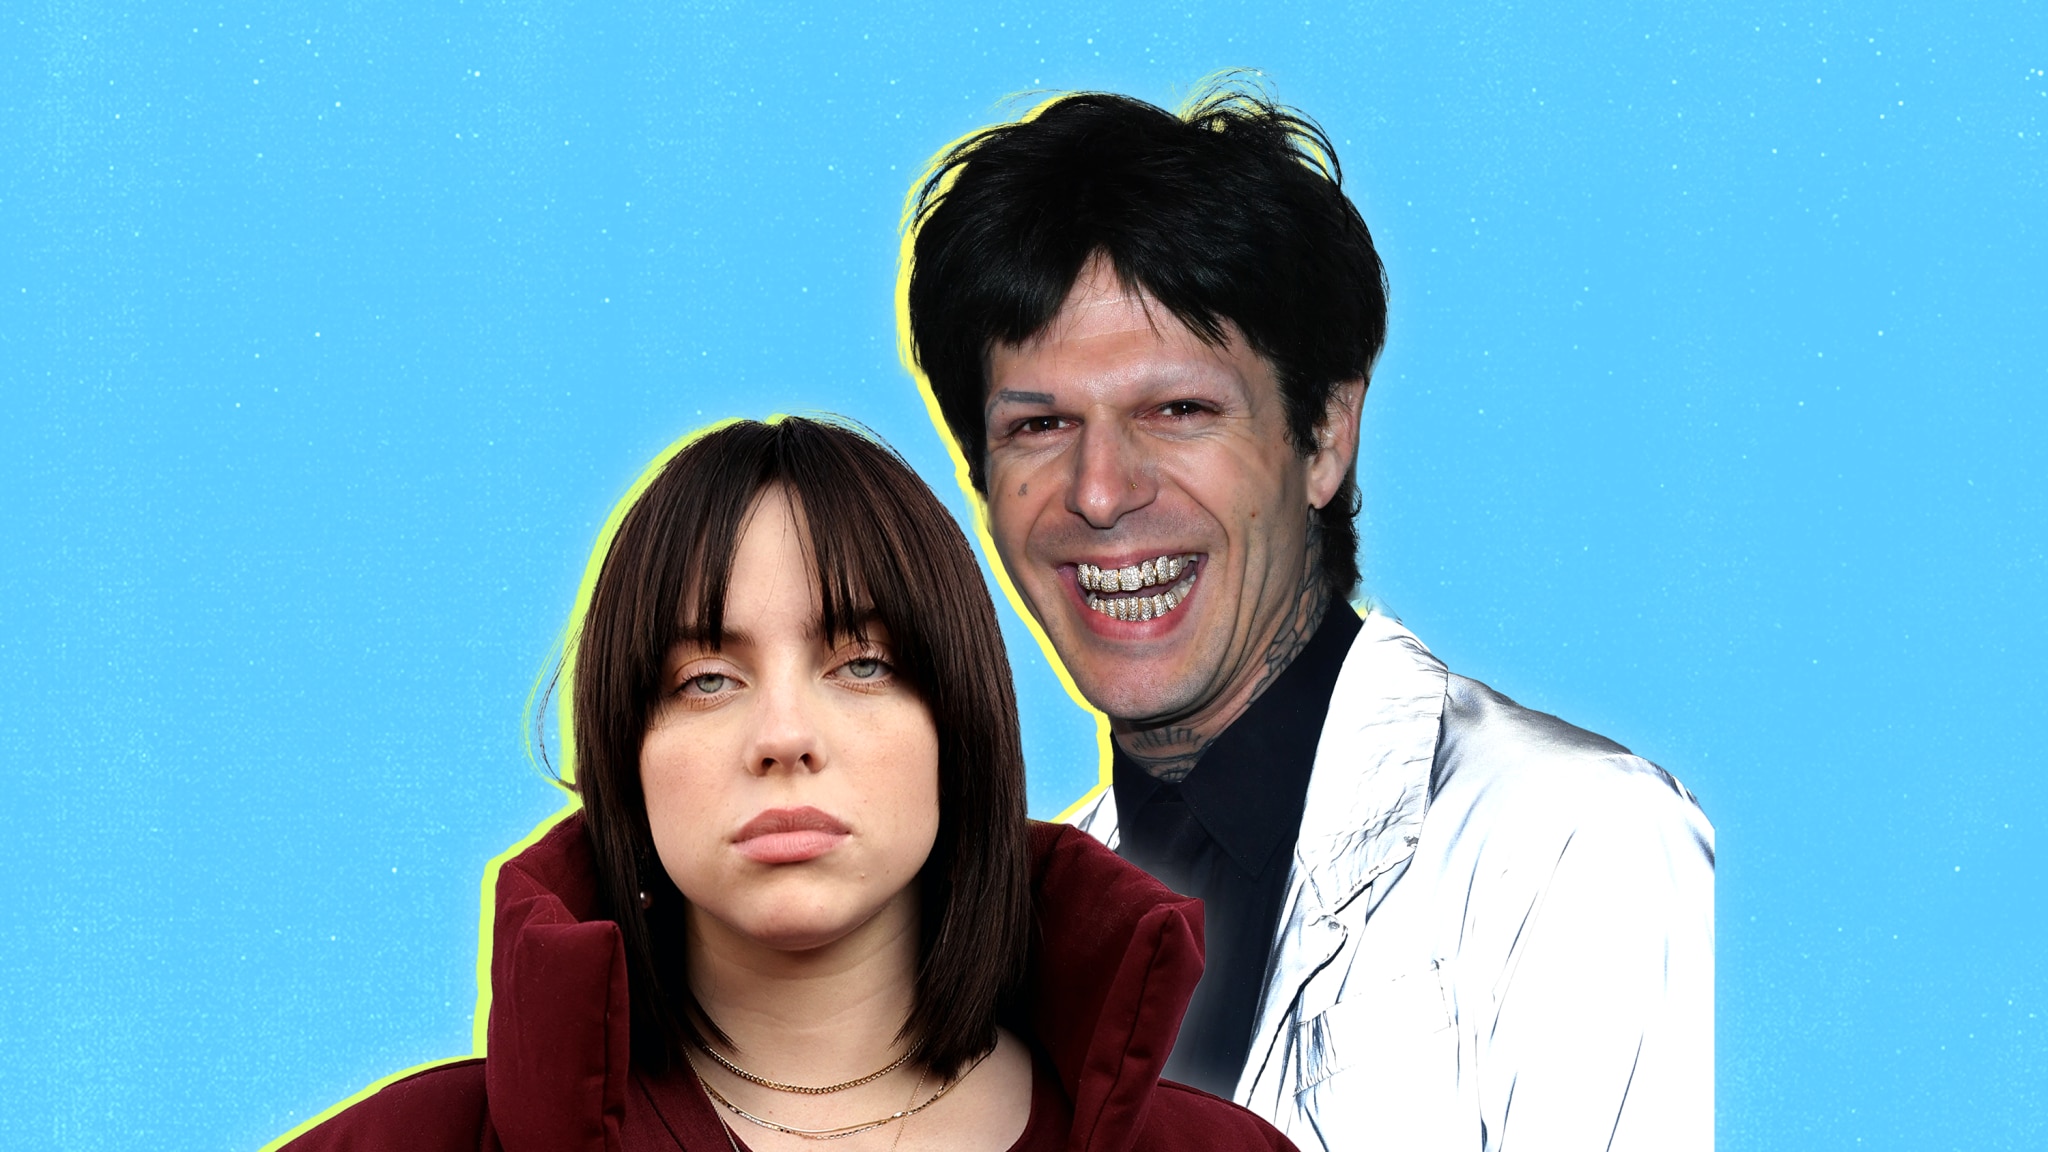 Billie Eilish, Jesse Rutherford rumoured relationship sparks age gap  discussion